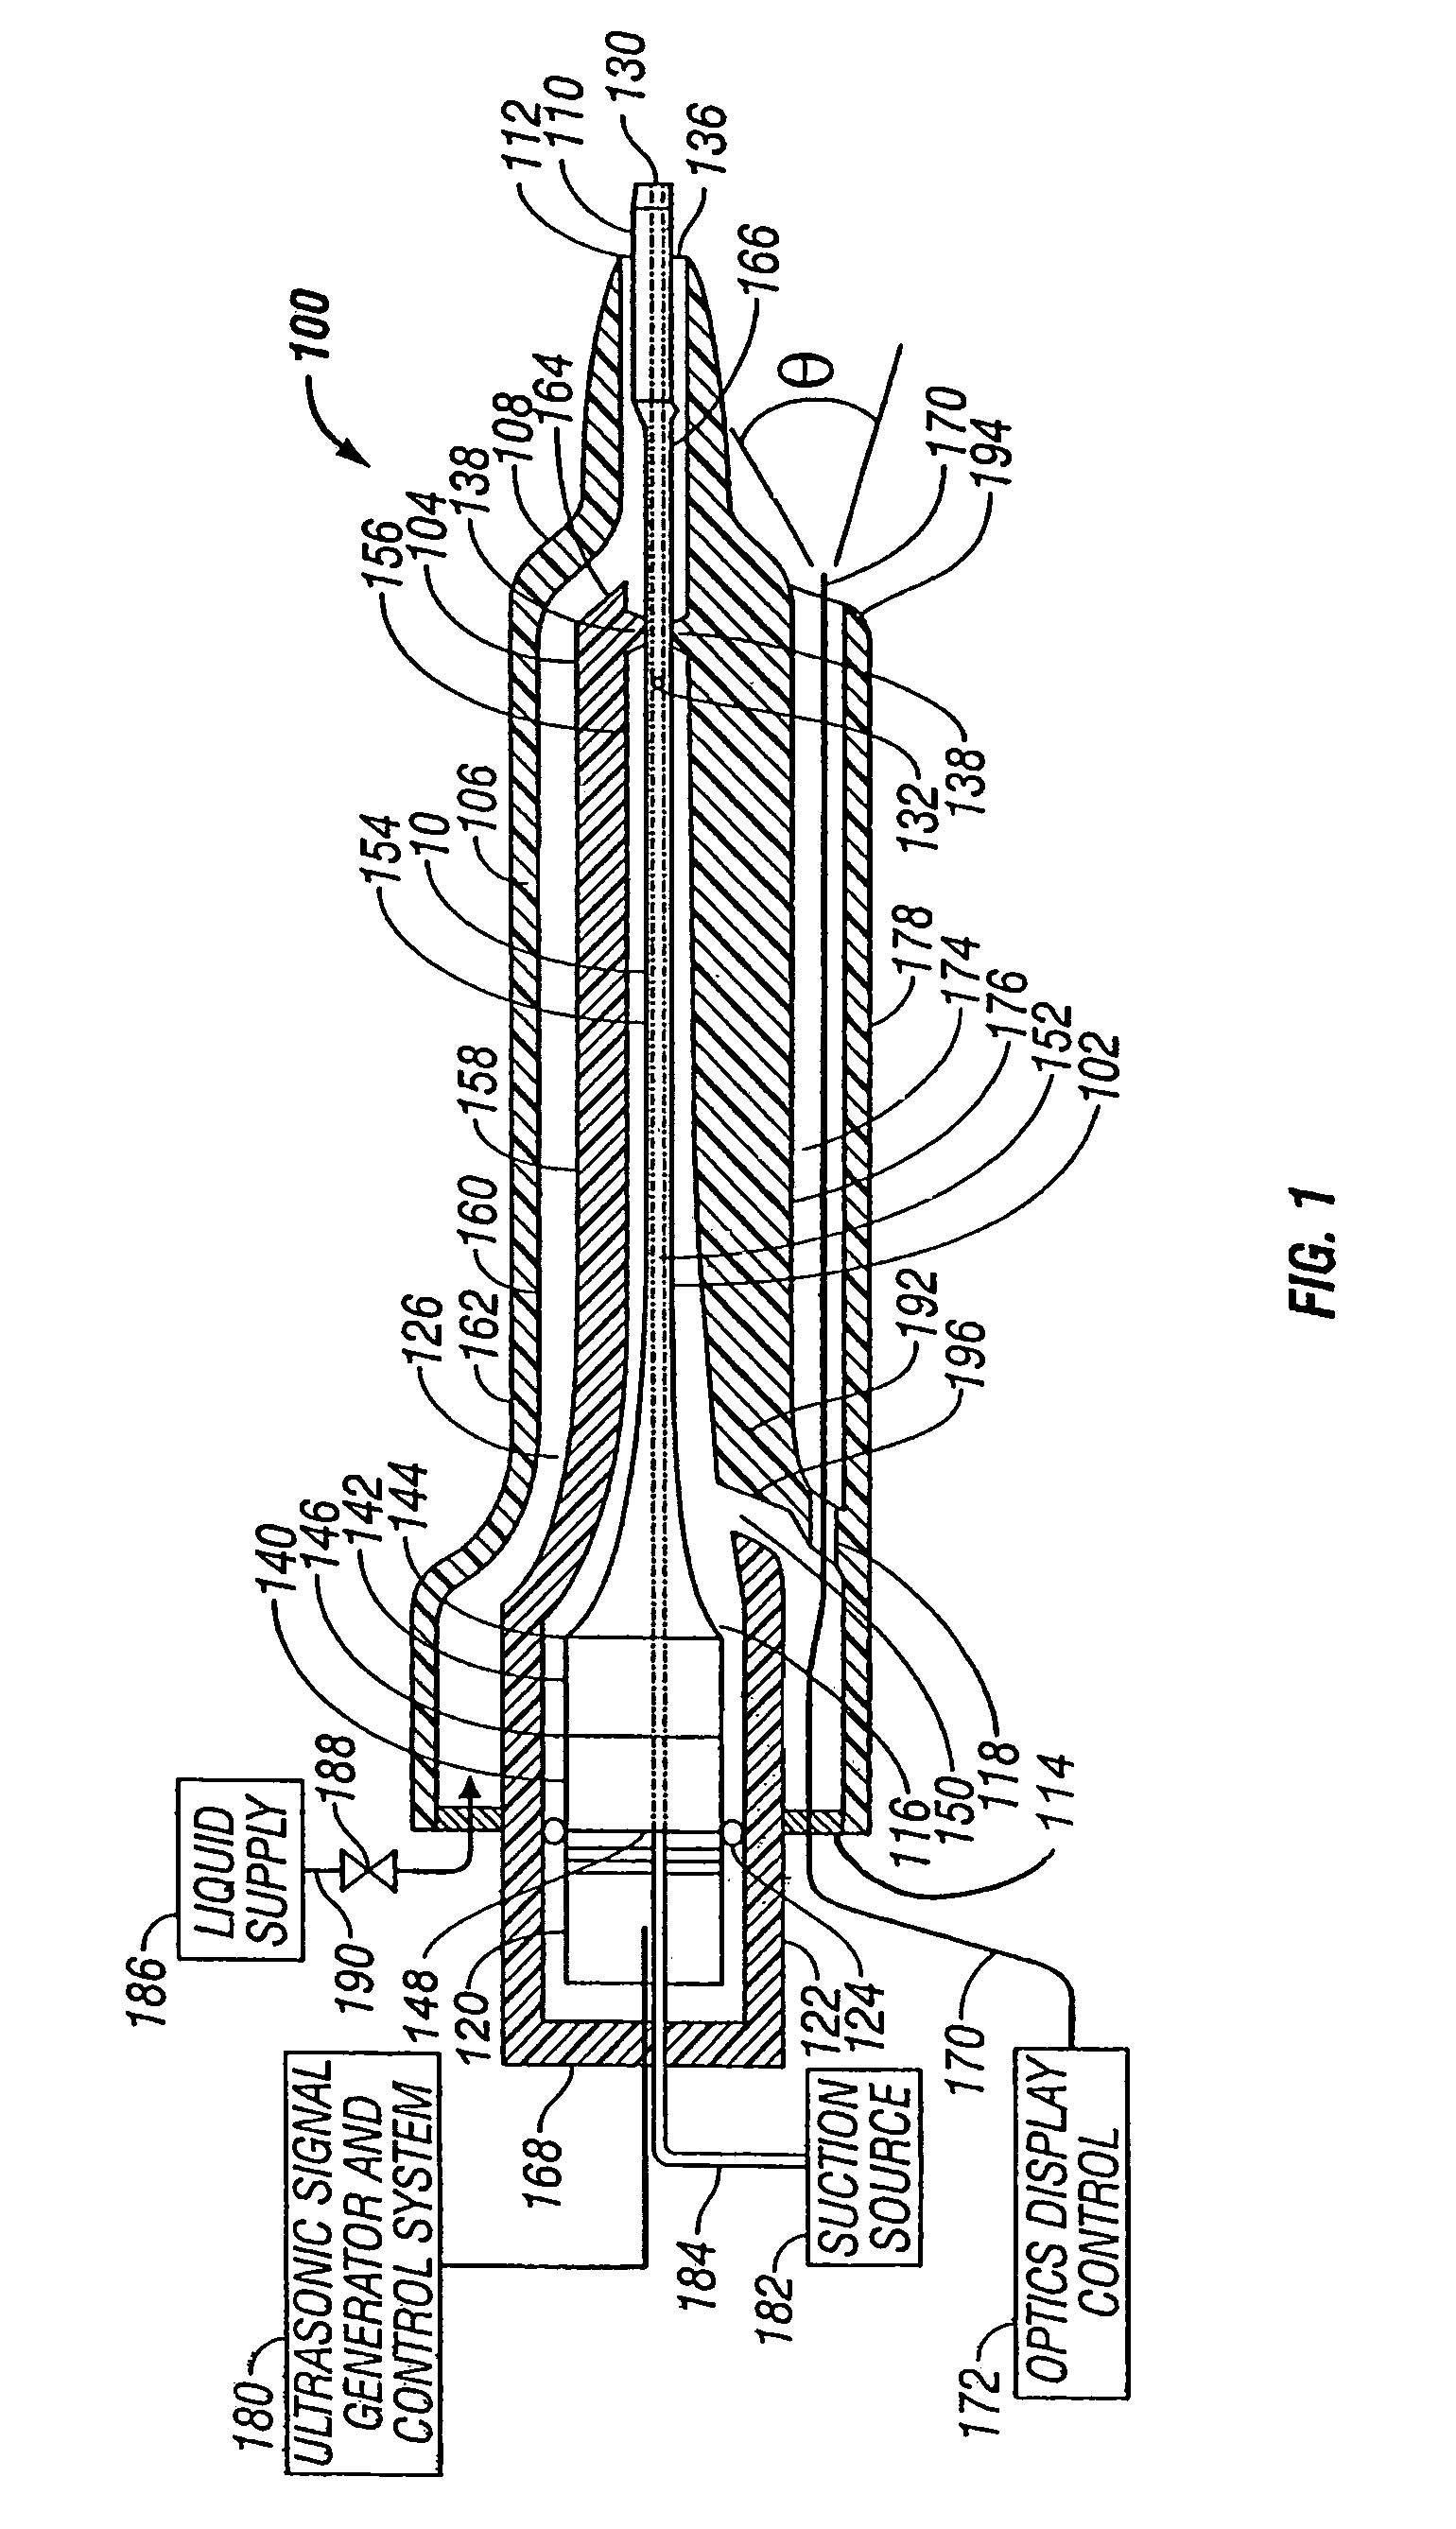 Endoscopic ultrasonic surgical aspirator for use in fluid filled cavities